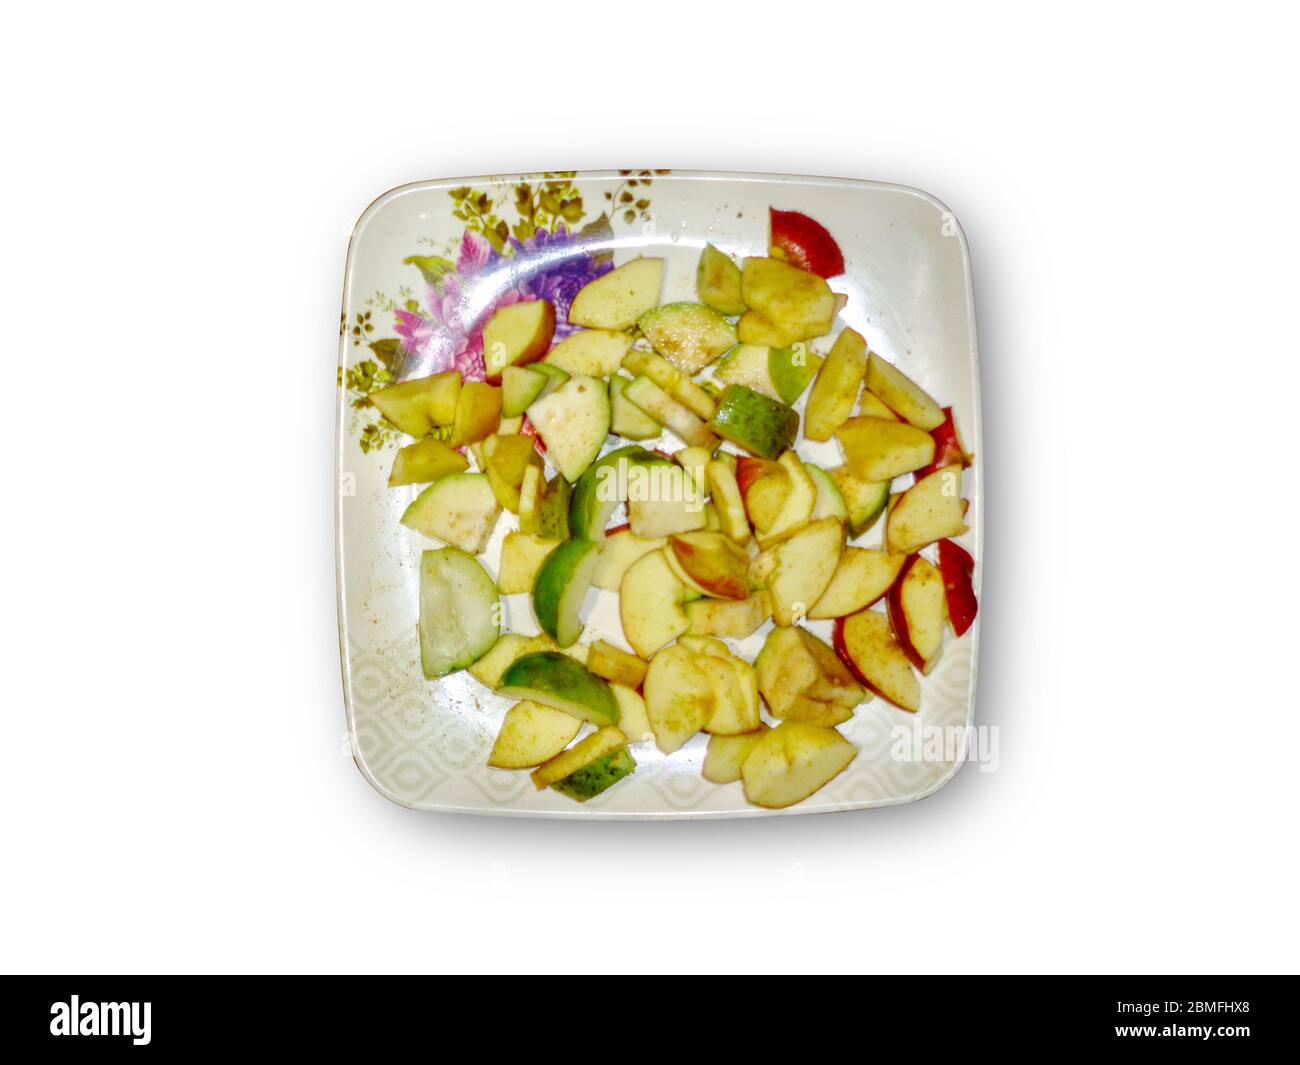 Fruit salad served in white plate healthy dish Stock Photo